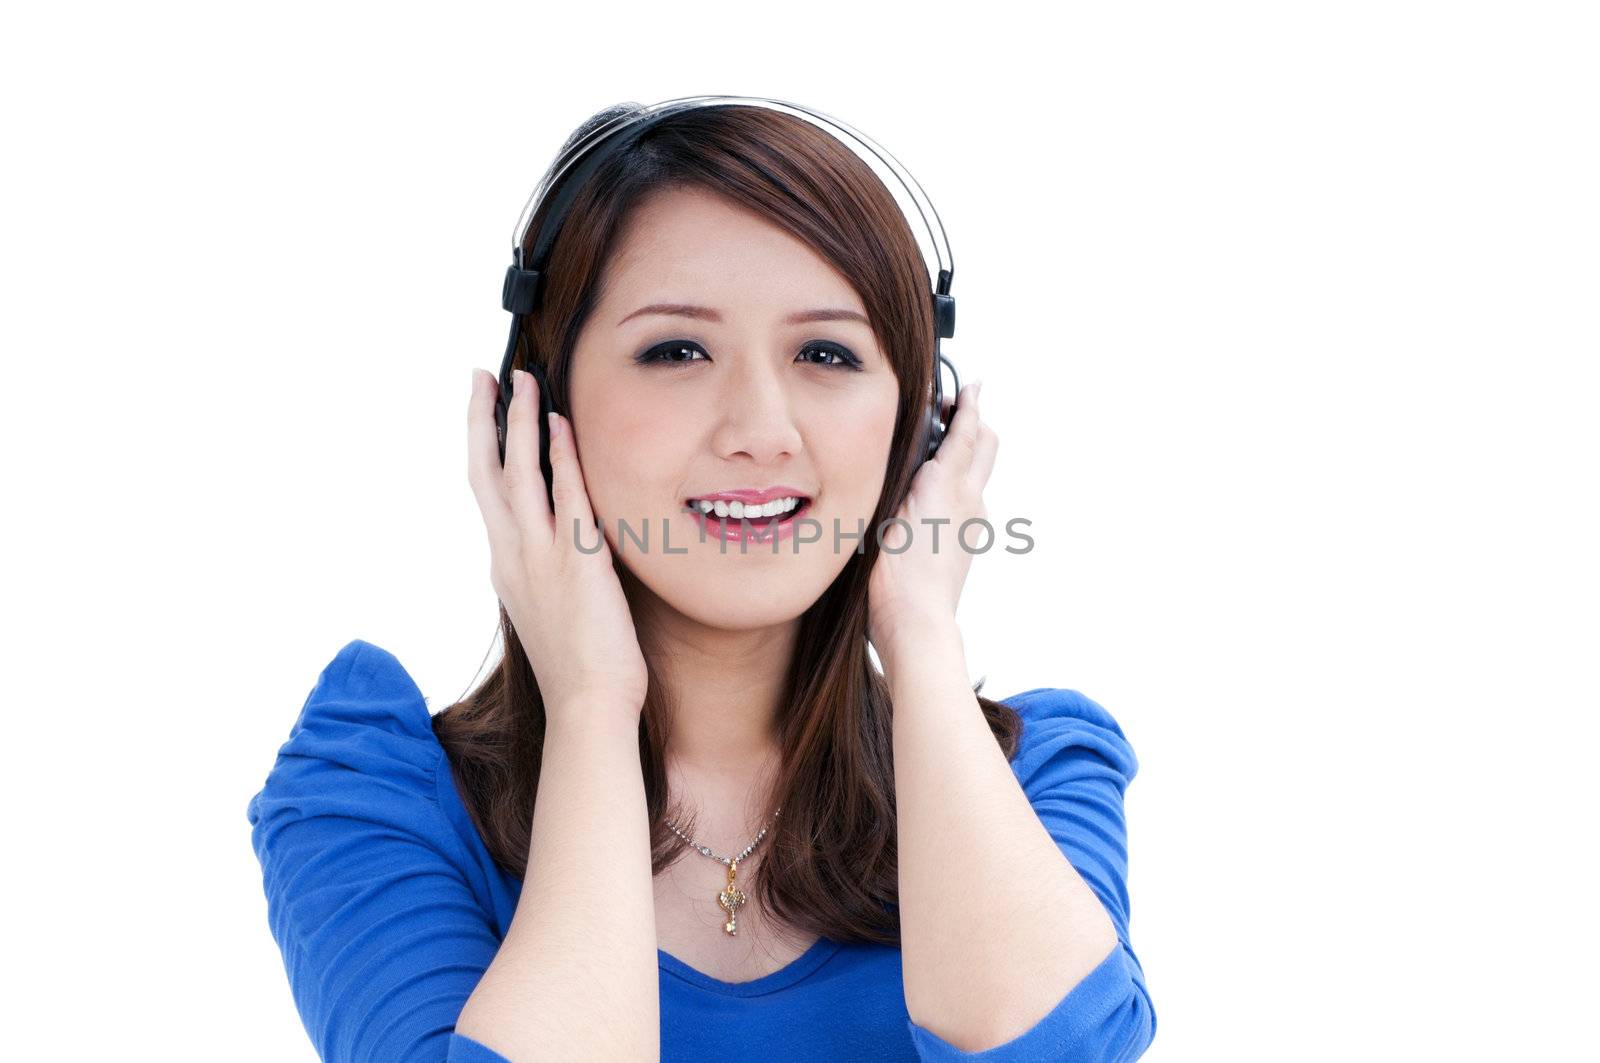 Portrait of an attractive young woman listening to music over white background.